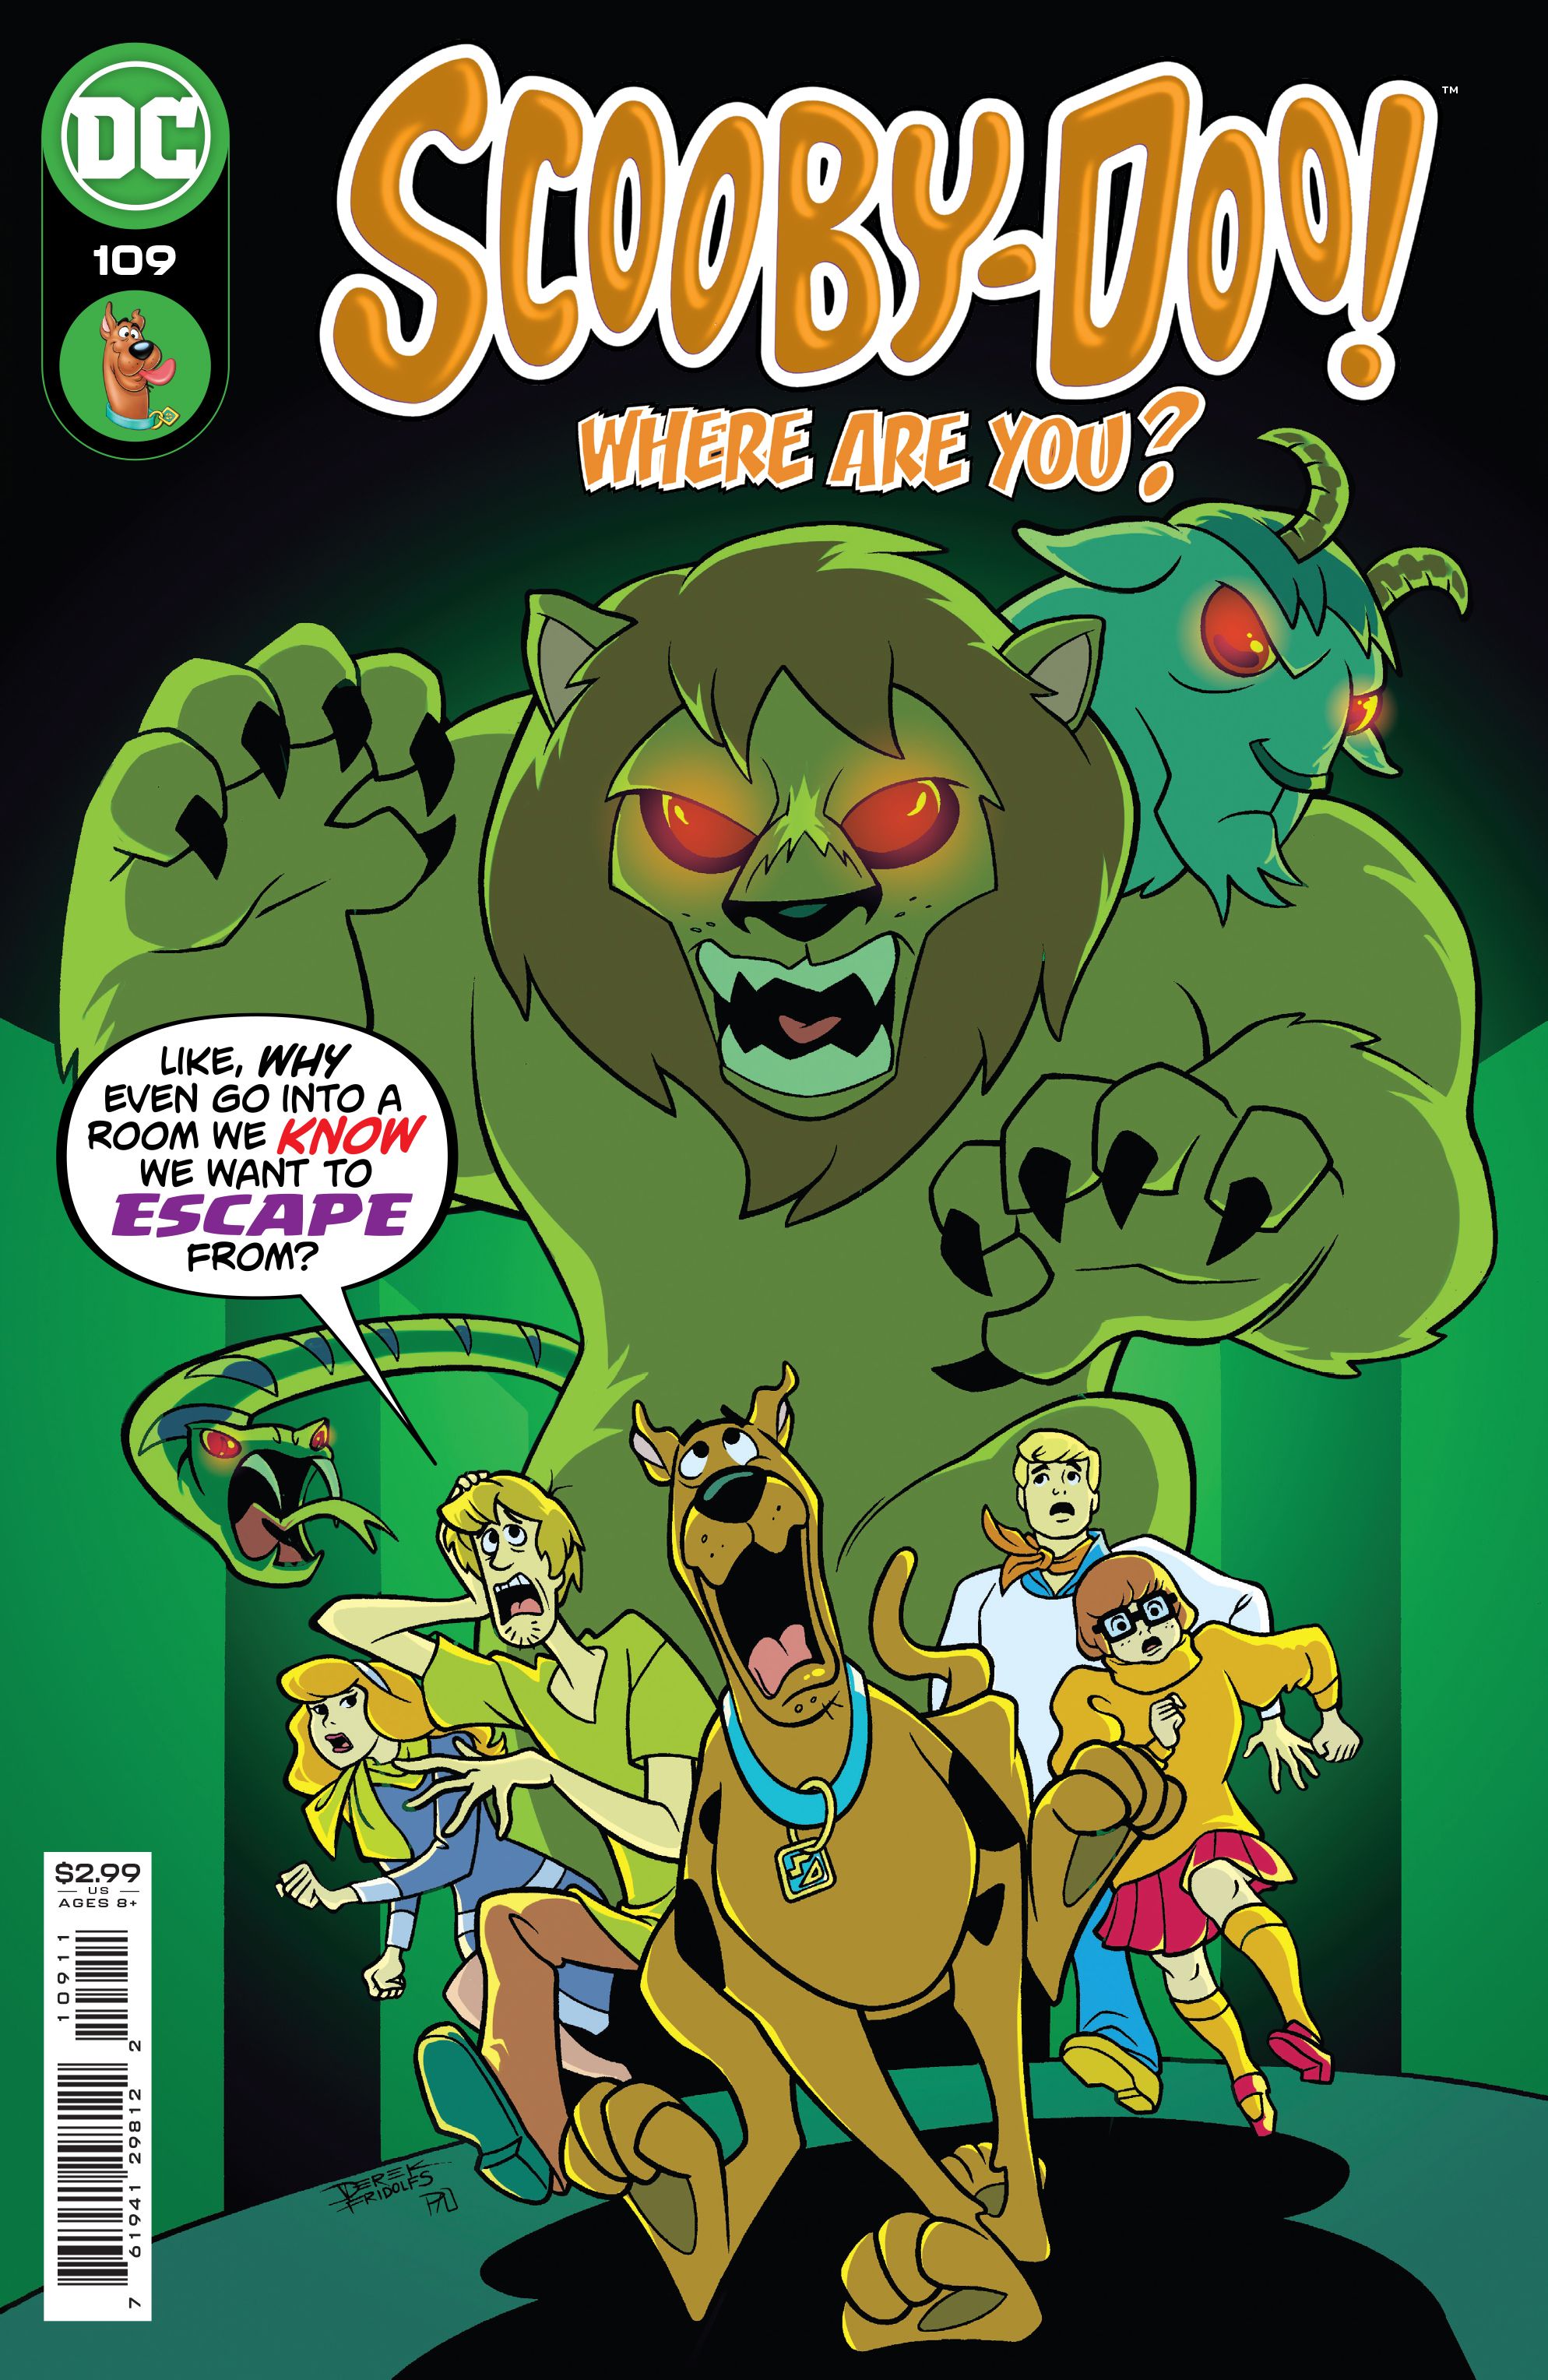 Scooby-Doo, Where Are You? #109 Comic